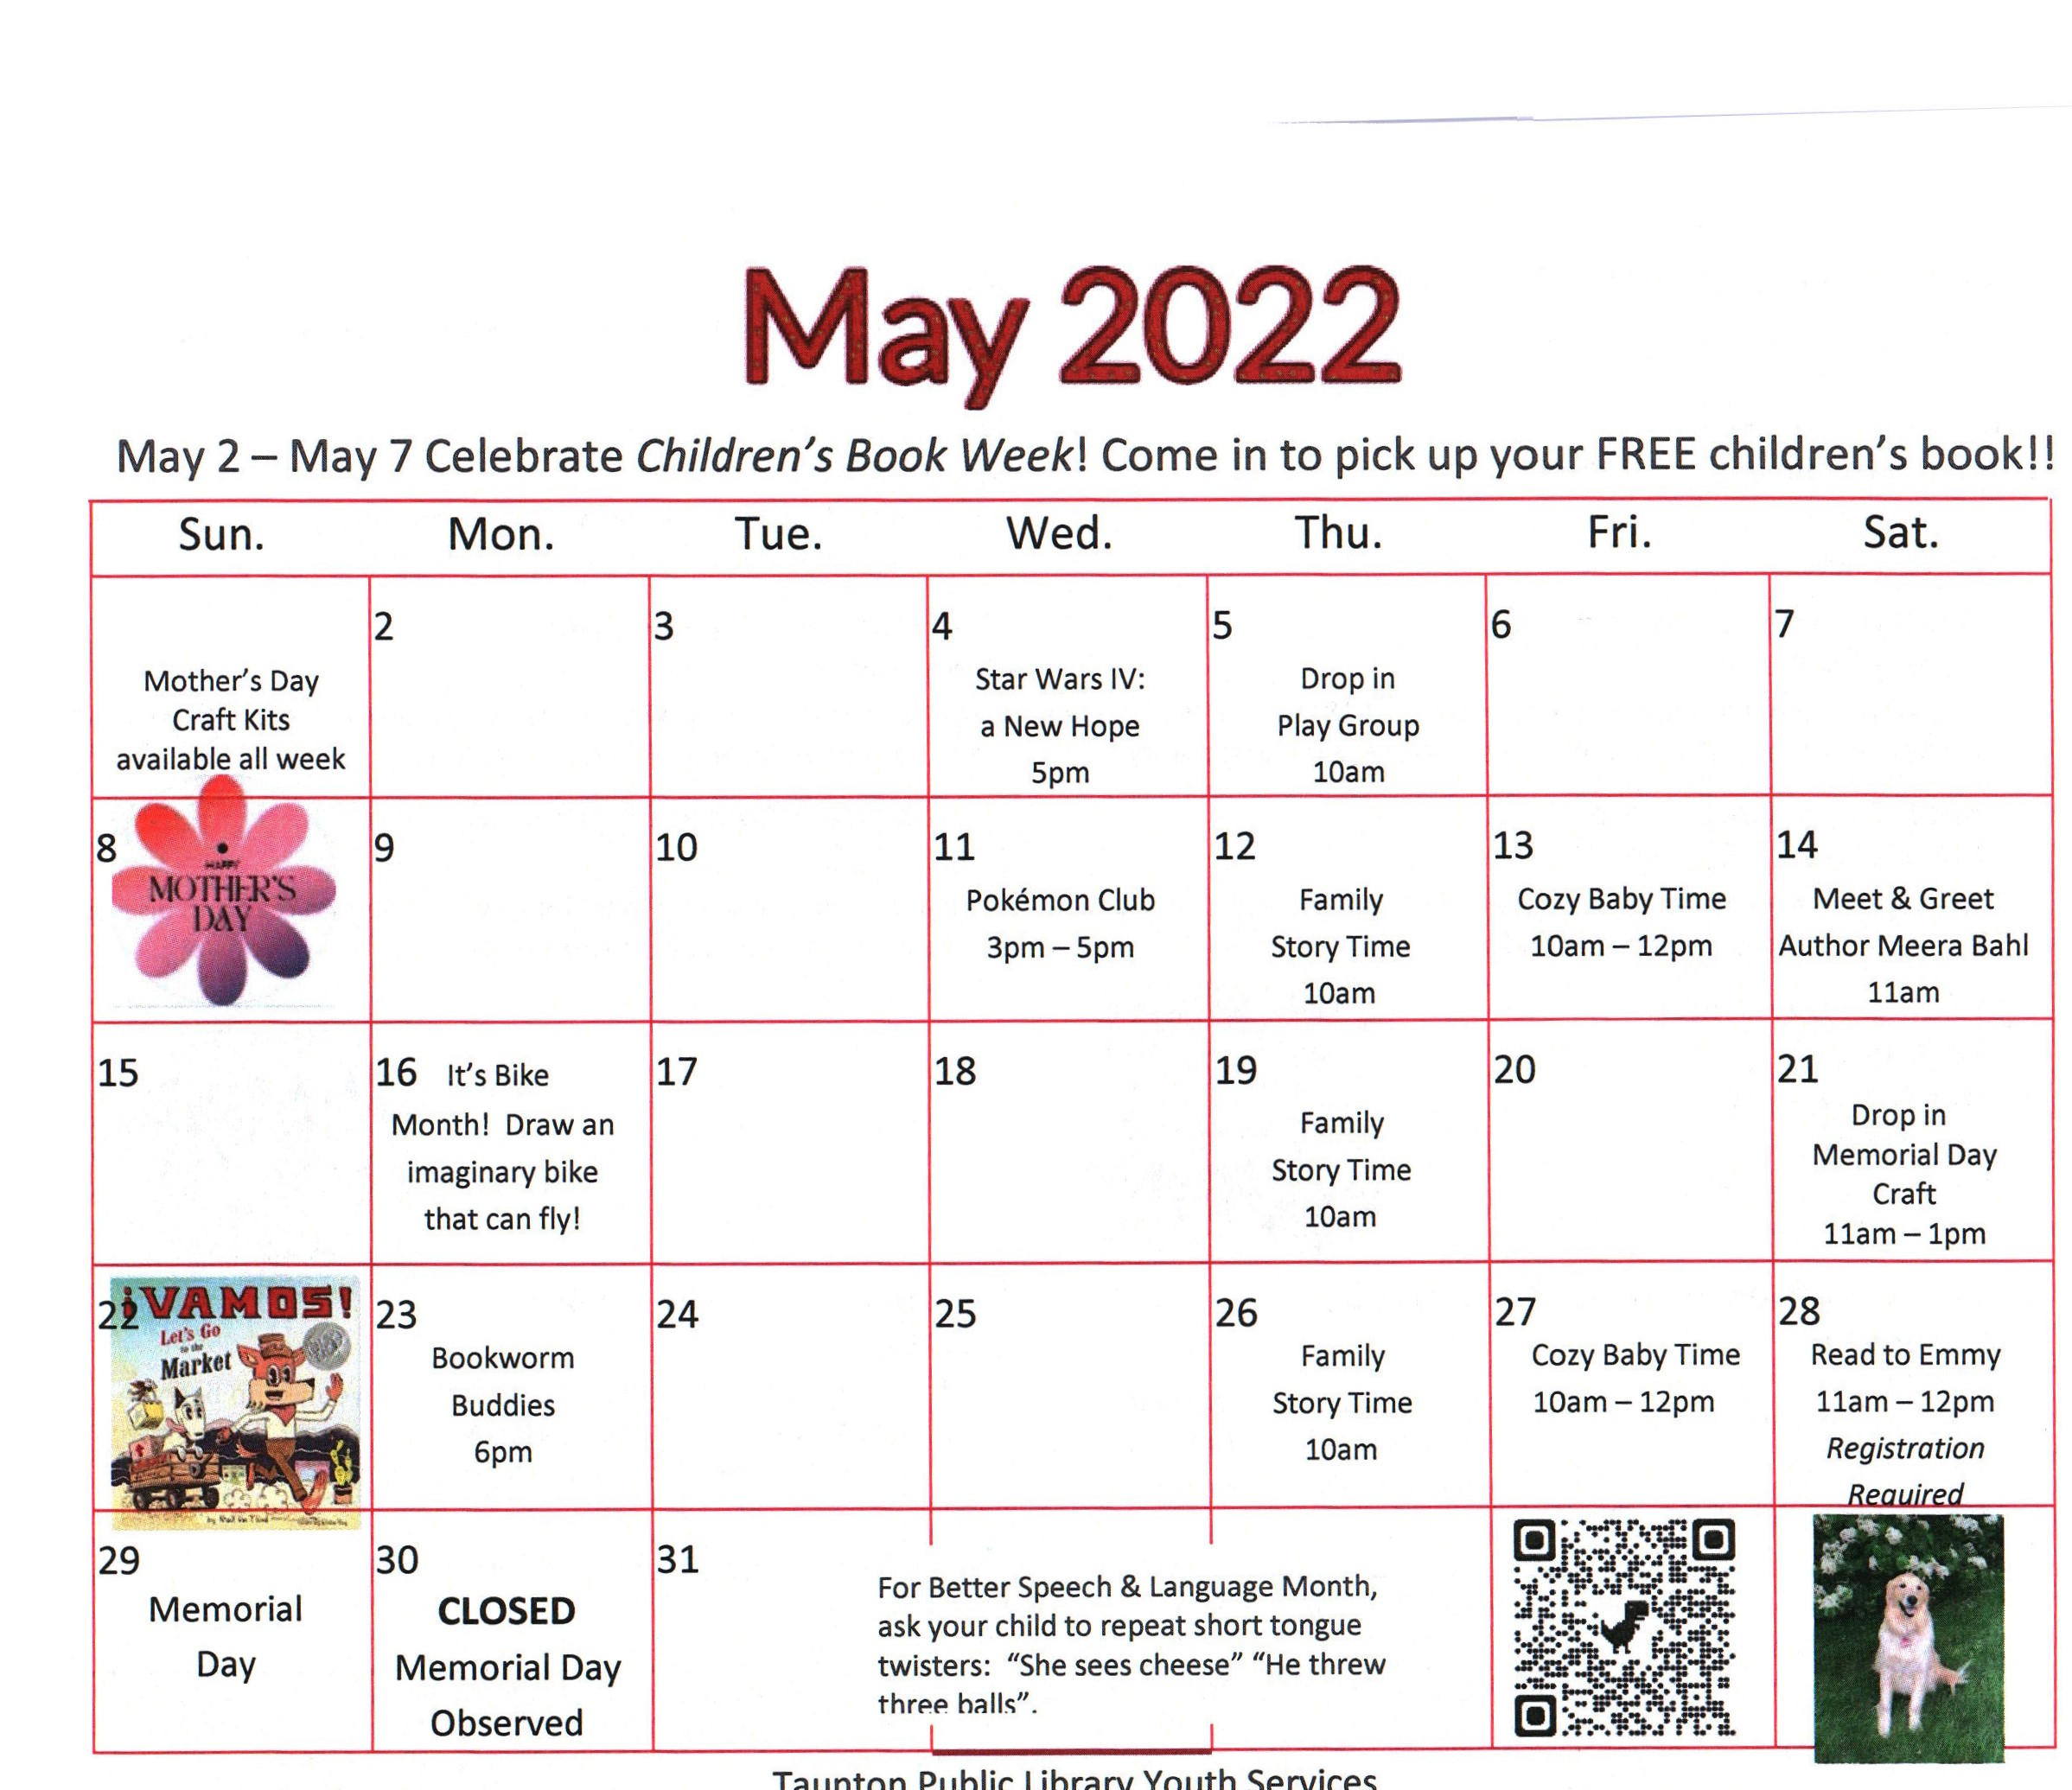 Calendar of events for Youth Services arranged for May 2022